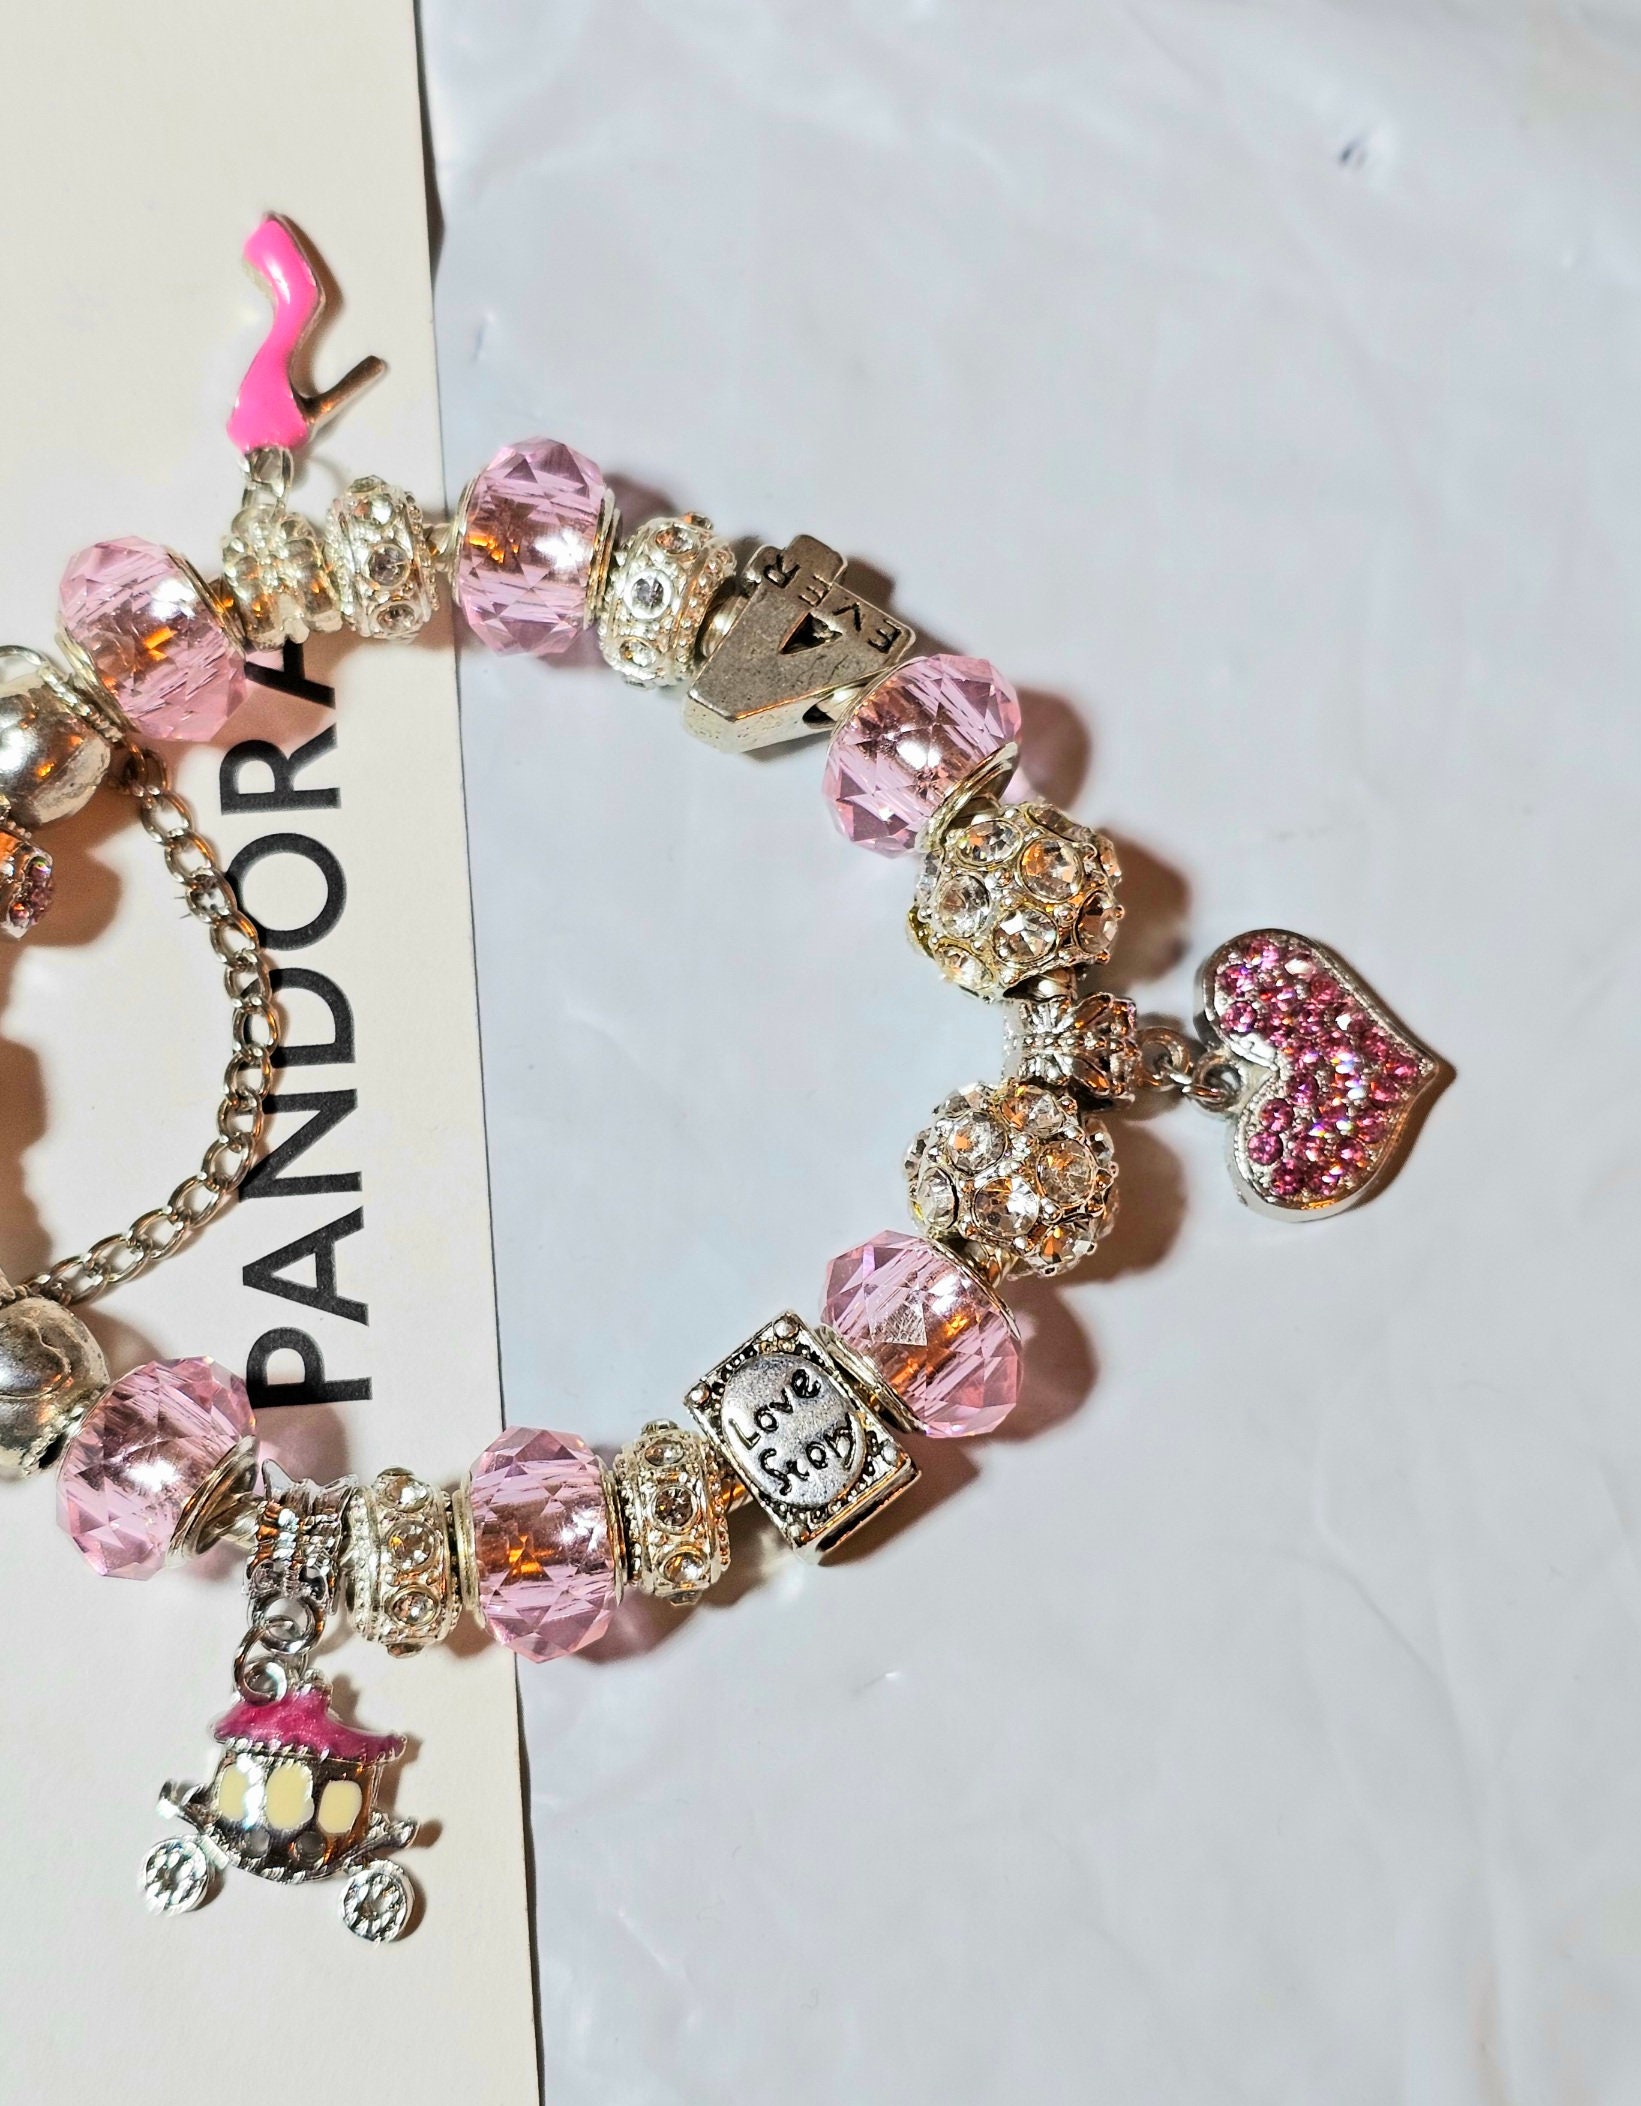 Pandora Like Cute Charm Bracelet. Easter Bunny. Pink, Green/white. Needs a  Home Large Encrusted Charm-rhinestones, Fairy Tale. Gift for Her 